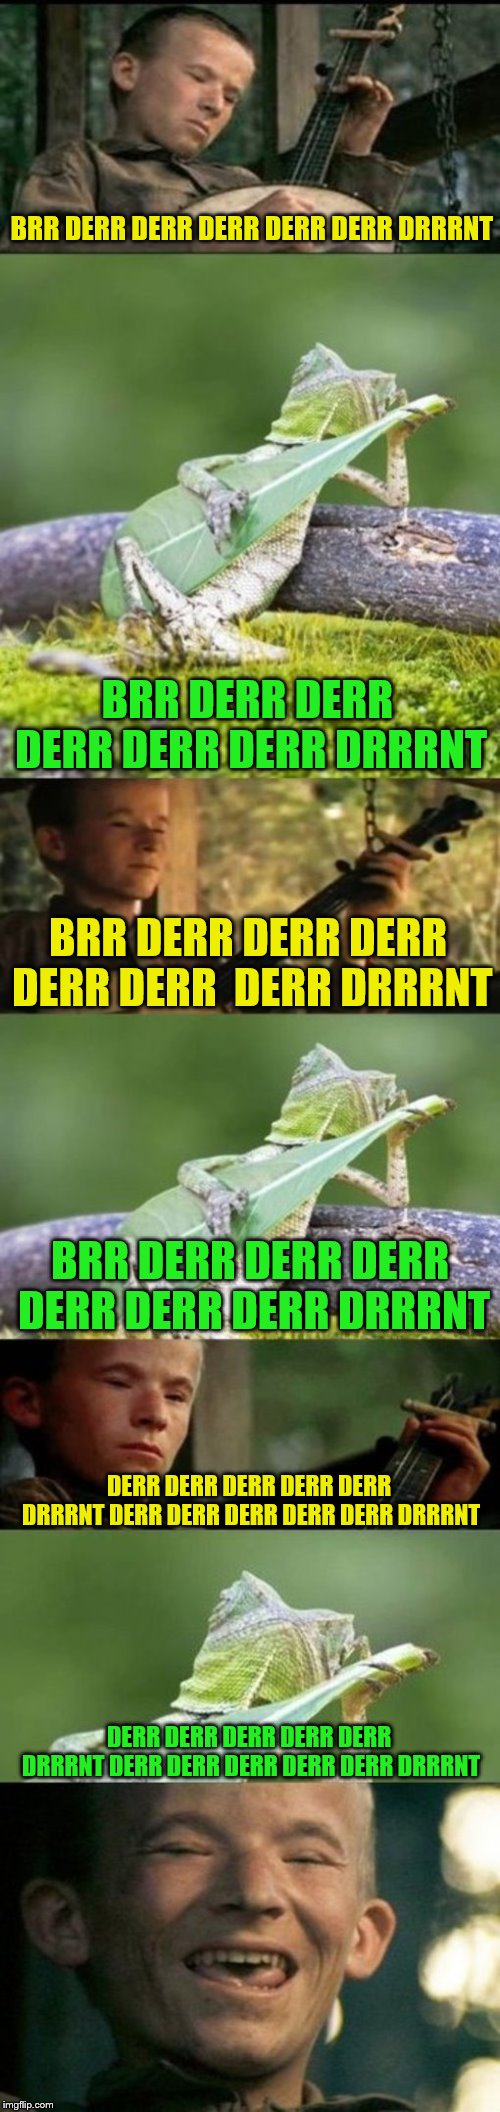 DUELING BANJOS  | BRR DERR DERR DERR DERR DERR DRRRNT; BRR DERR DERR DERR DERR DERR DRRRNT; BRR DERR DERR DERR DERR DERR  DERR DRRRNT; BRR DERR DERR DERR DERR DERR DERR DRRRNT; DERR DERR DERR DERR DERR DRRRNT DERR DERR DERR DERR DERR DRRRNT; DERR DERR DERR DERR DERR DRRRNT DERR DERR DERR DERR DERR DRRRNT | image tagged in memes,deliverance,dueling banjos,lizard,banjo,try writing banjo sounds lol | made w/ Imgflip meme maker